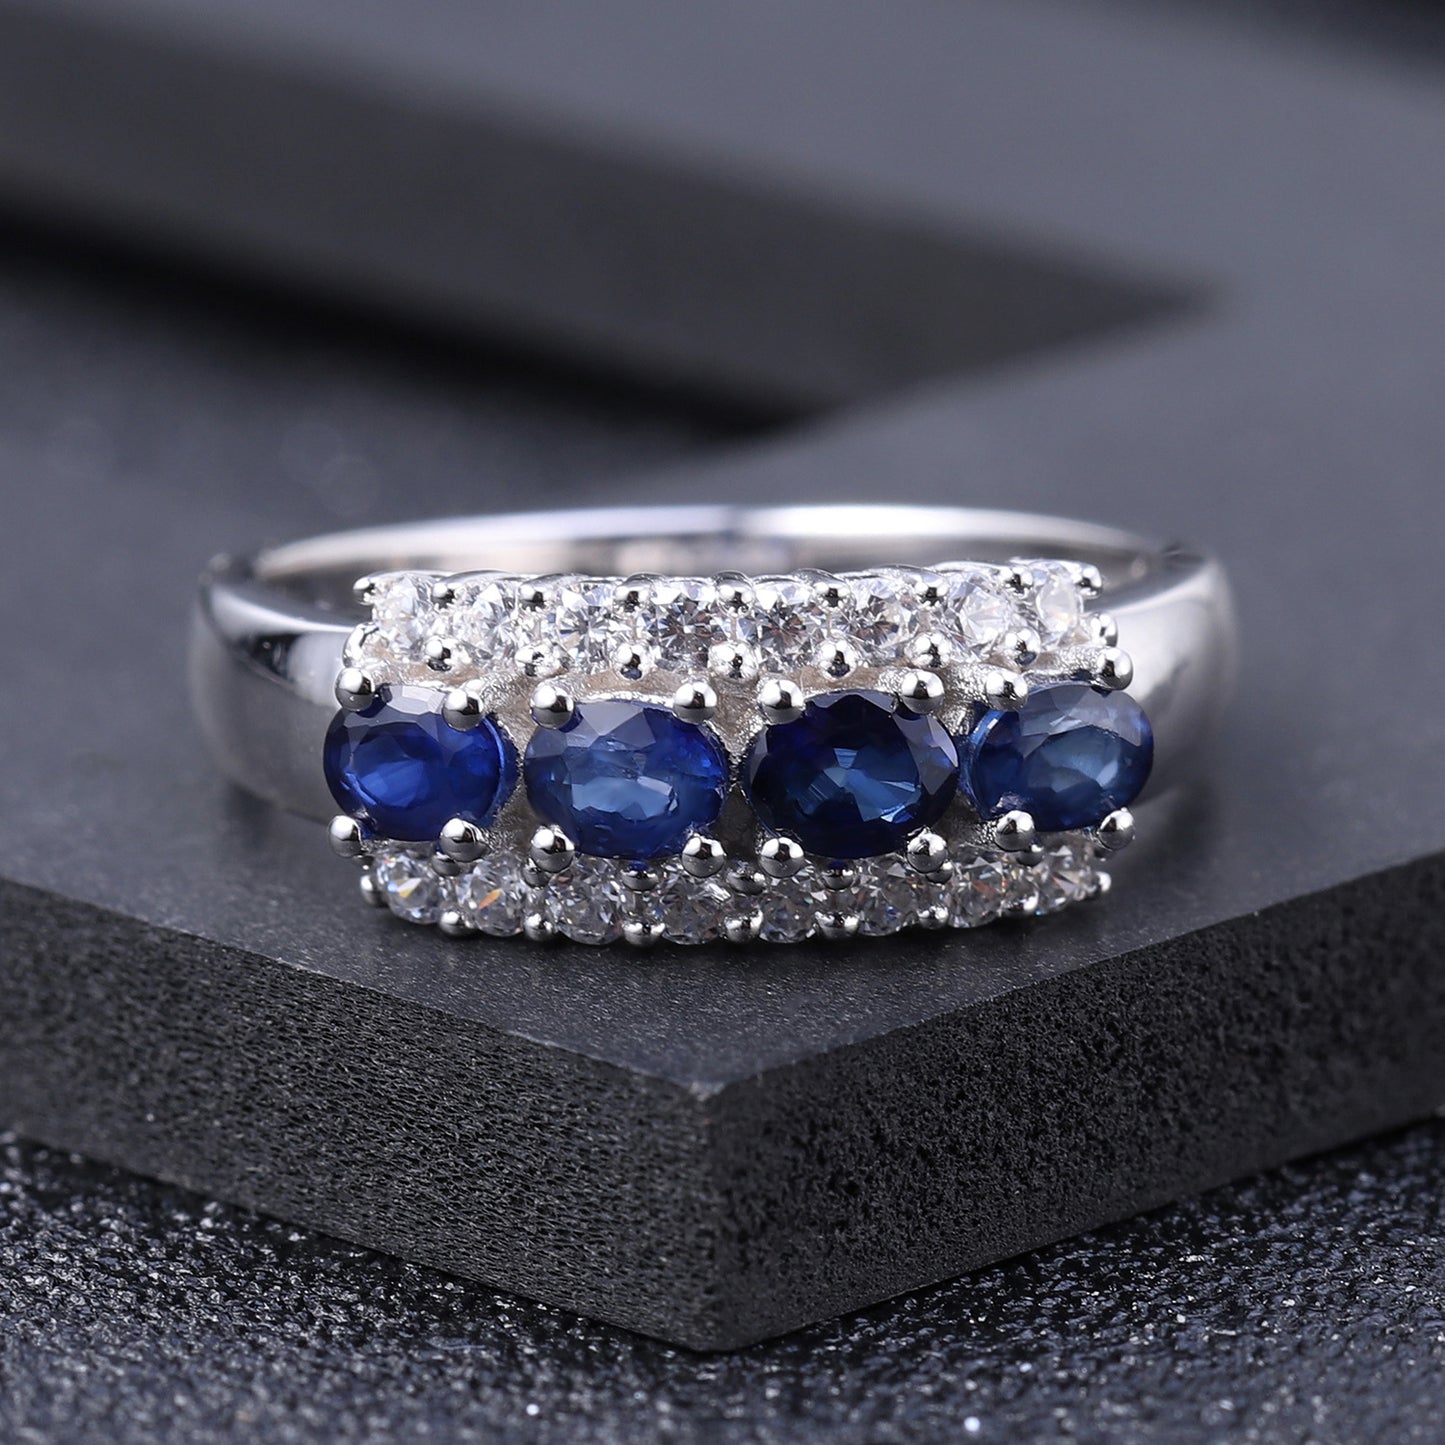 Luxury Premium Sapphire Stylish Design with S925 Silver Ring for Women